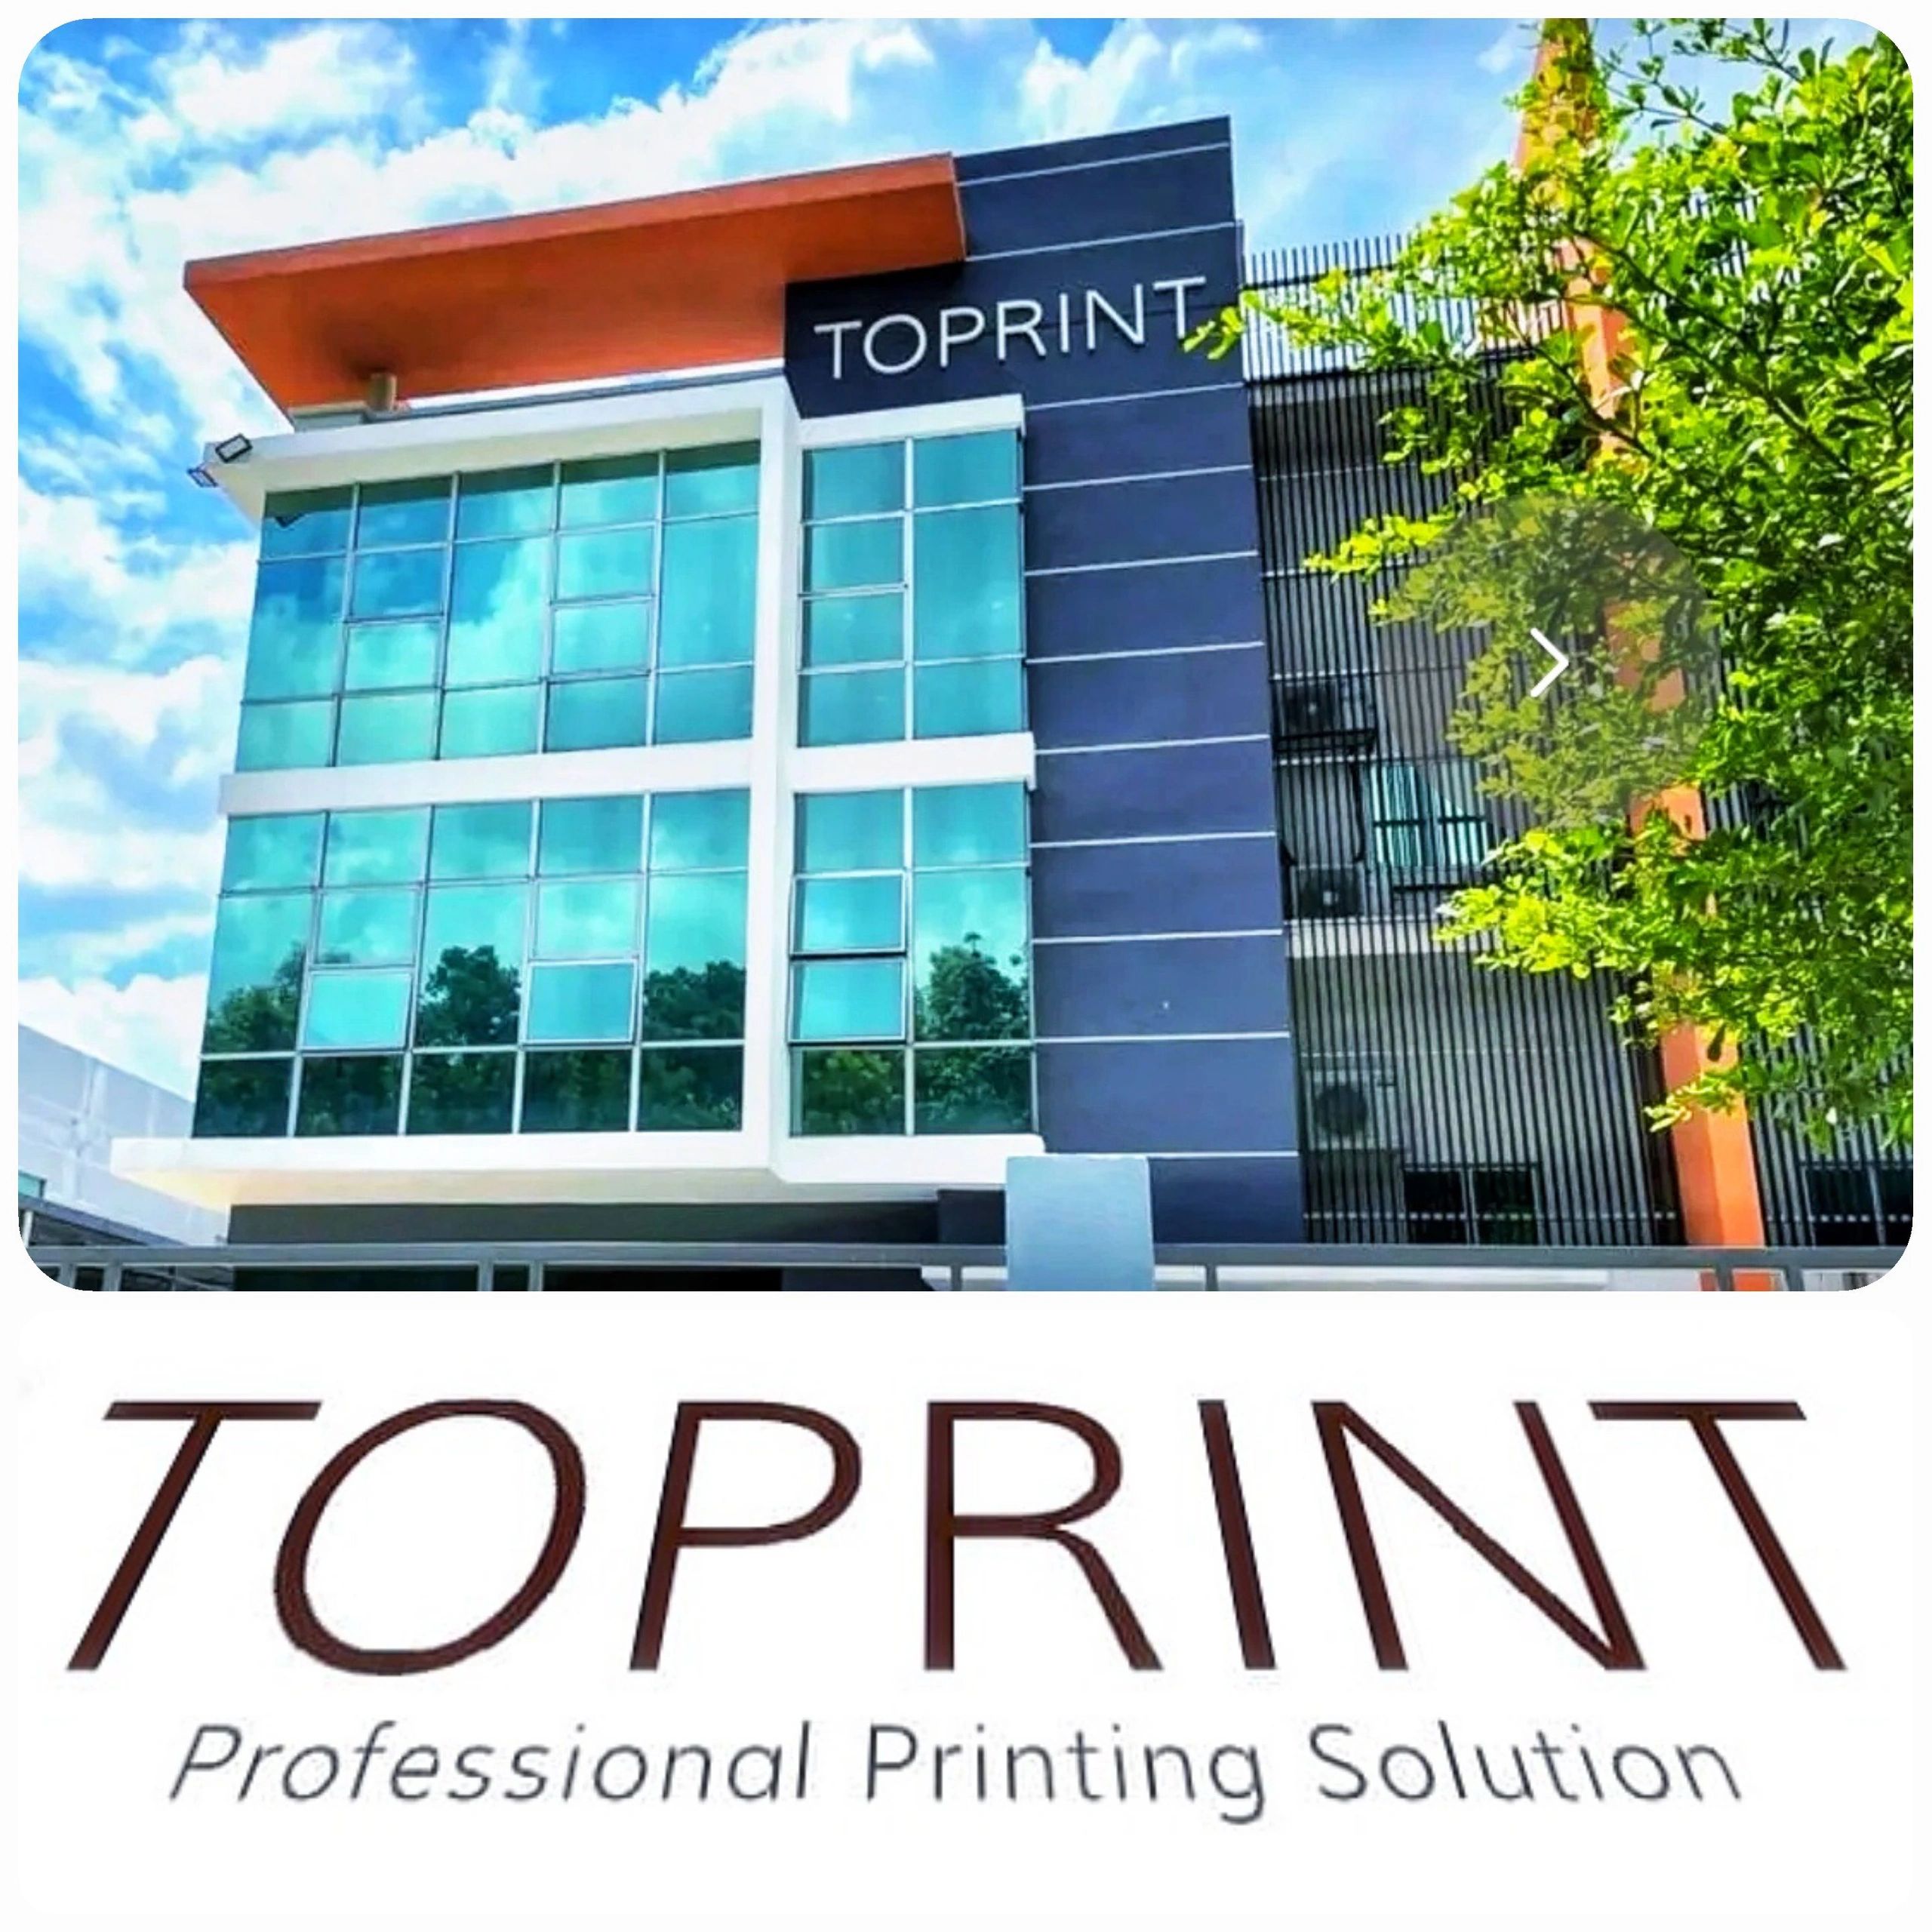 Get in Touch with TOPRINT
Your Ultimate Solution